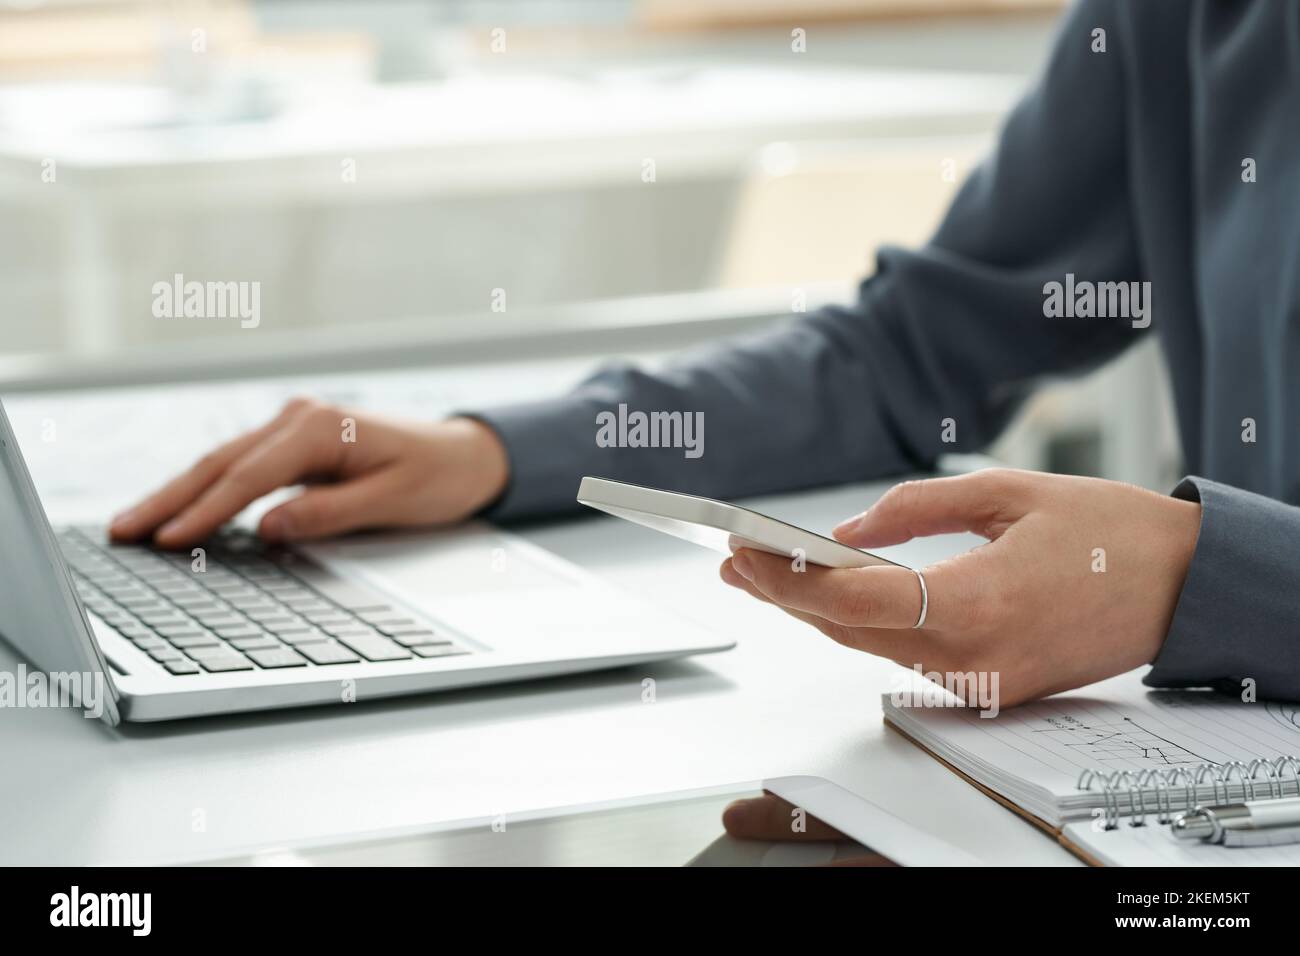 Close-up of young manager using her smartphone while working online on computer at table at office Stock Photo